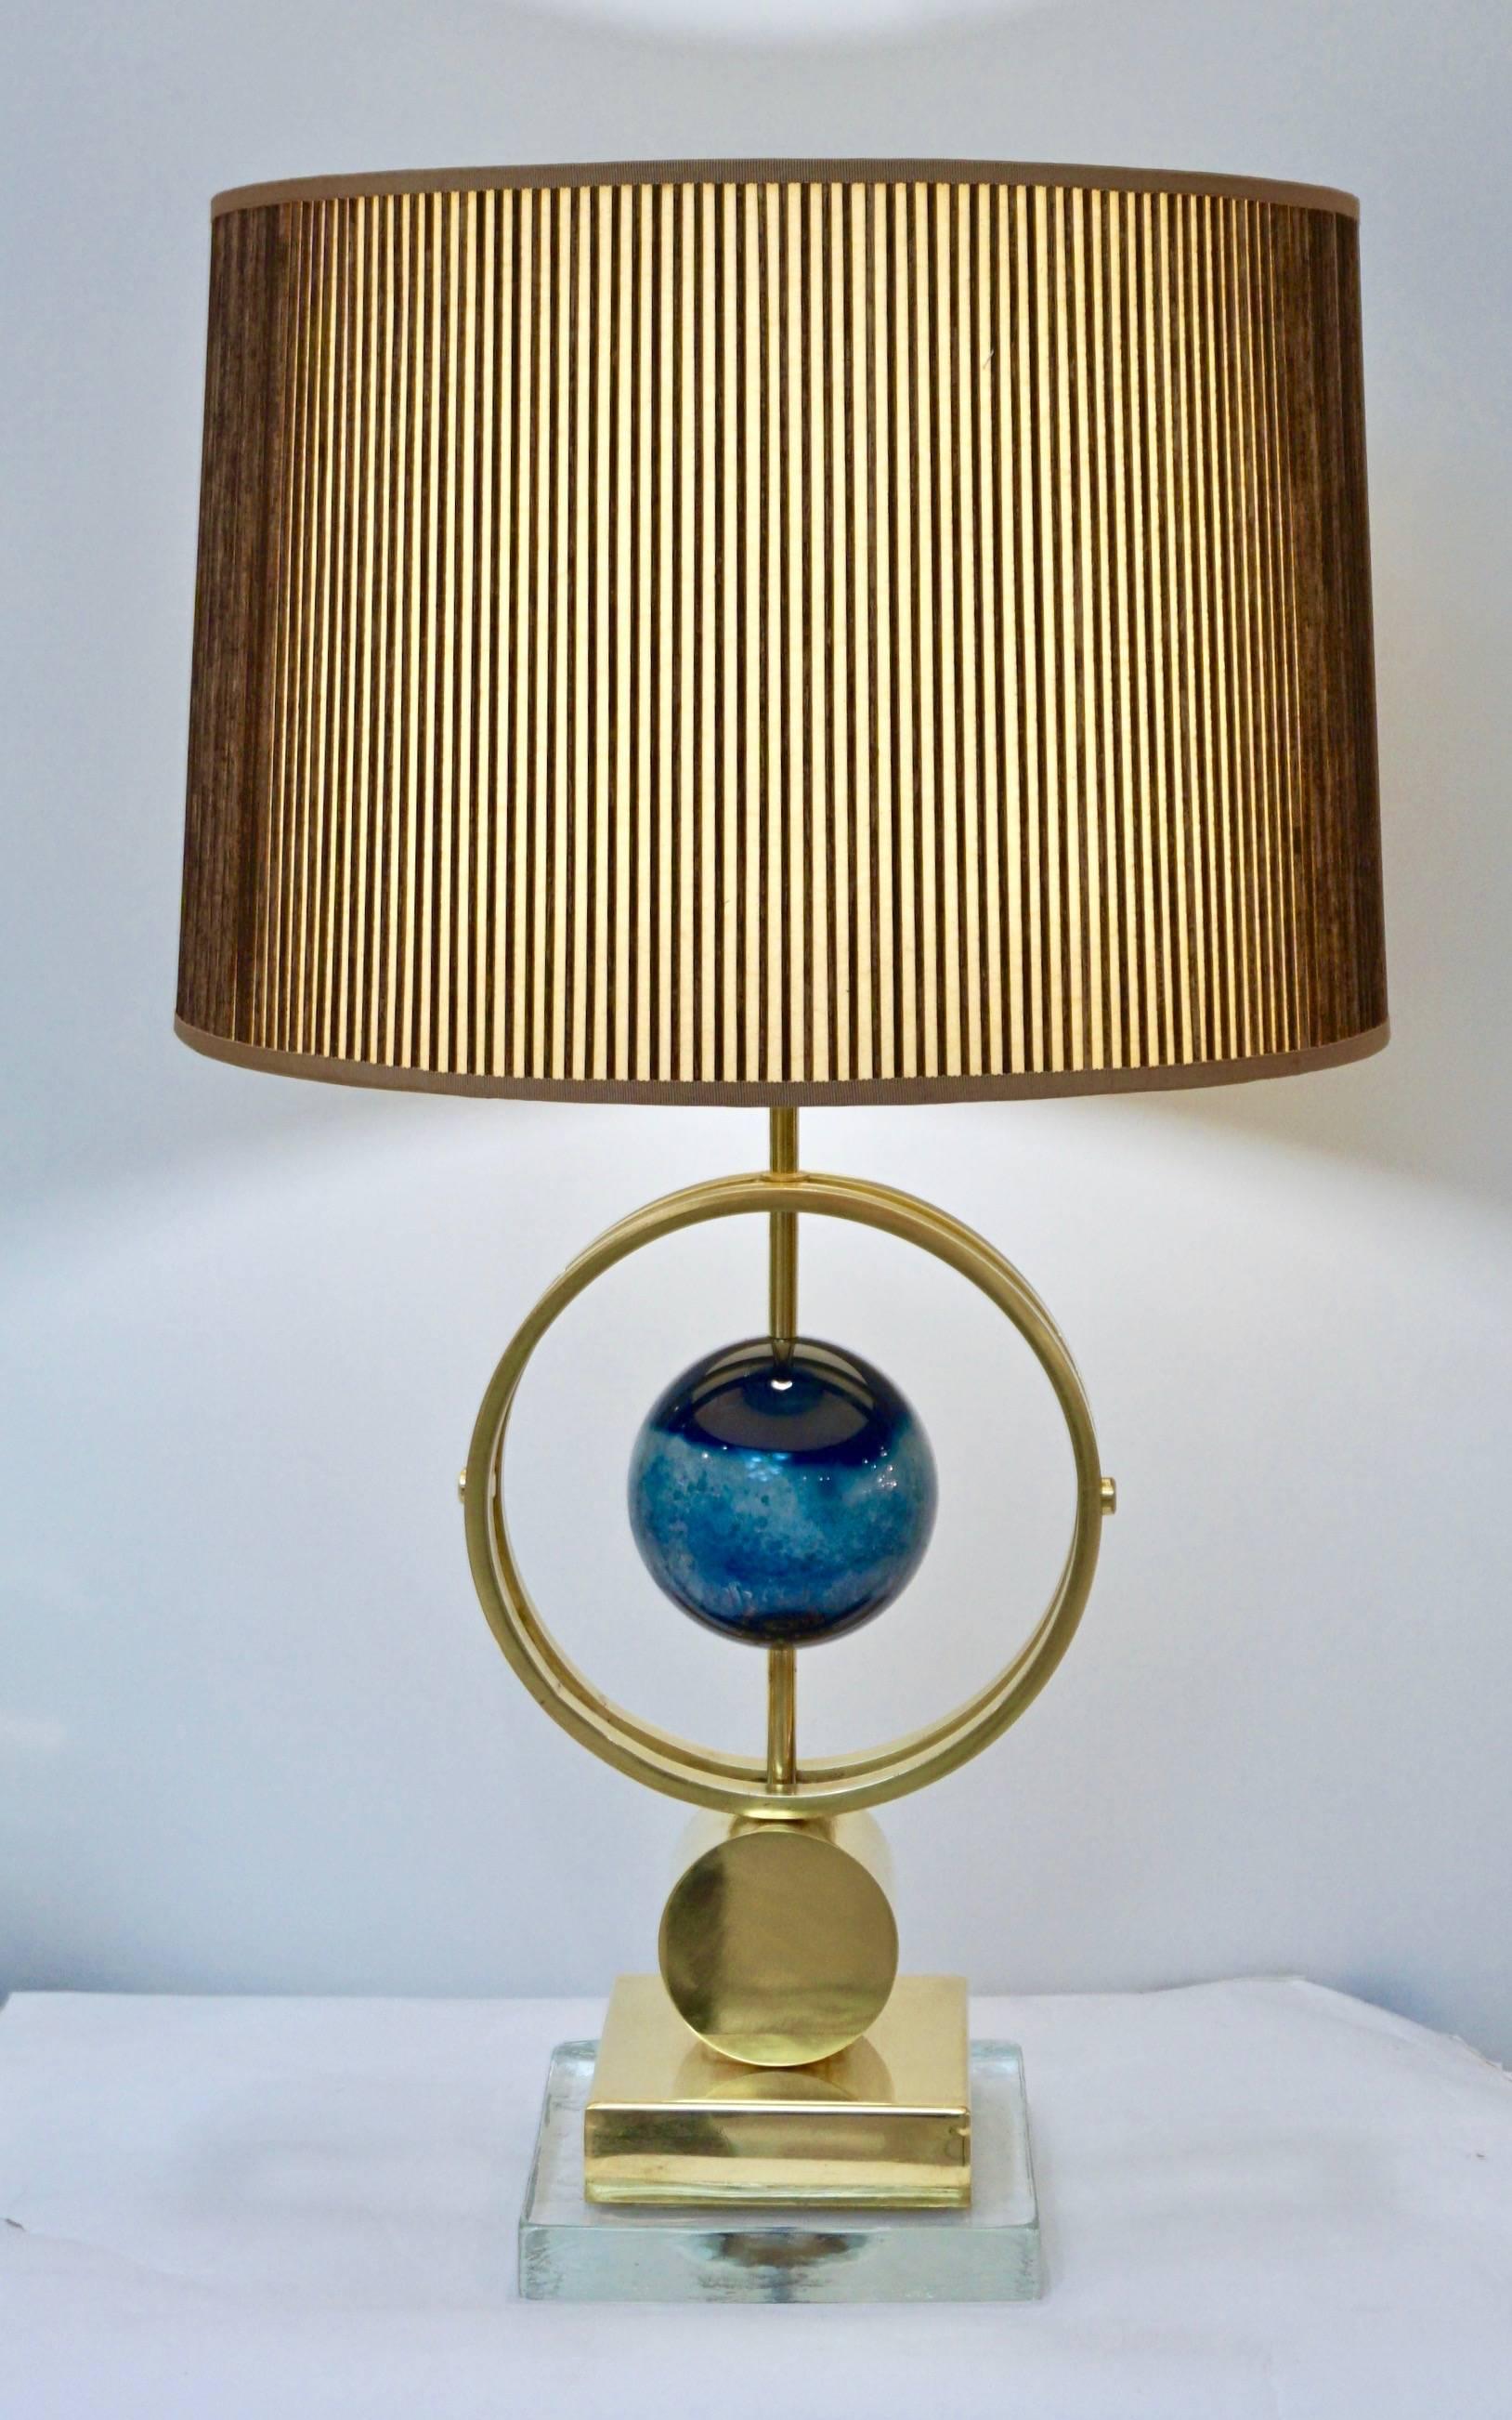 This contemporary Italian pair of organic fine design table lamps presents a high quality craftsmanship, the brass structure presents a double open ring circling a precious whole agate stone in sea aqua blue tones, polished in a solid sphere